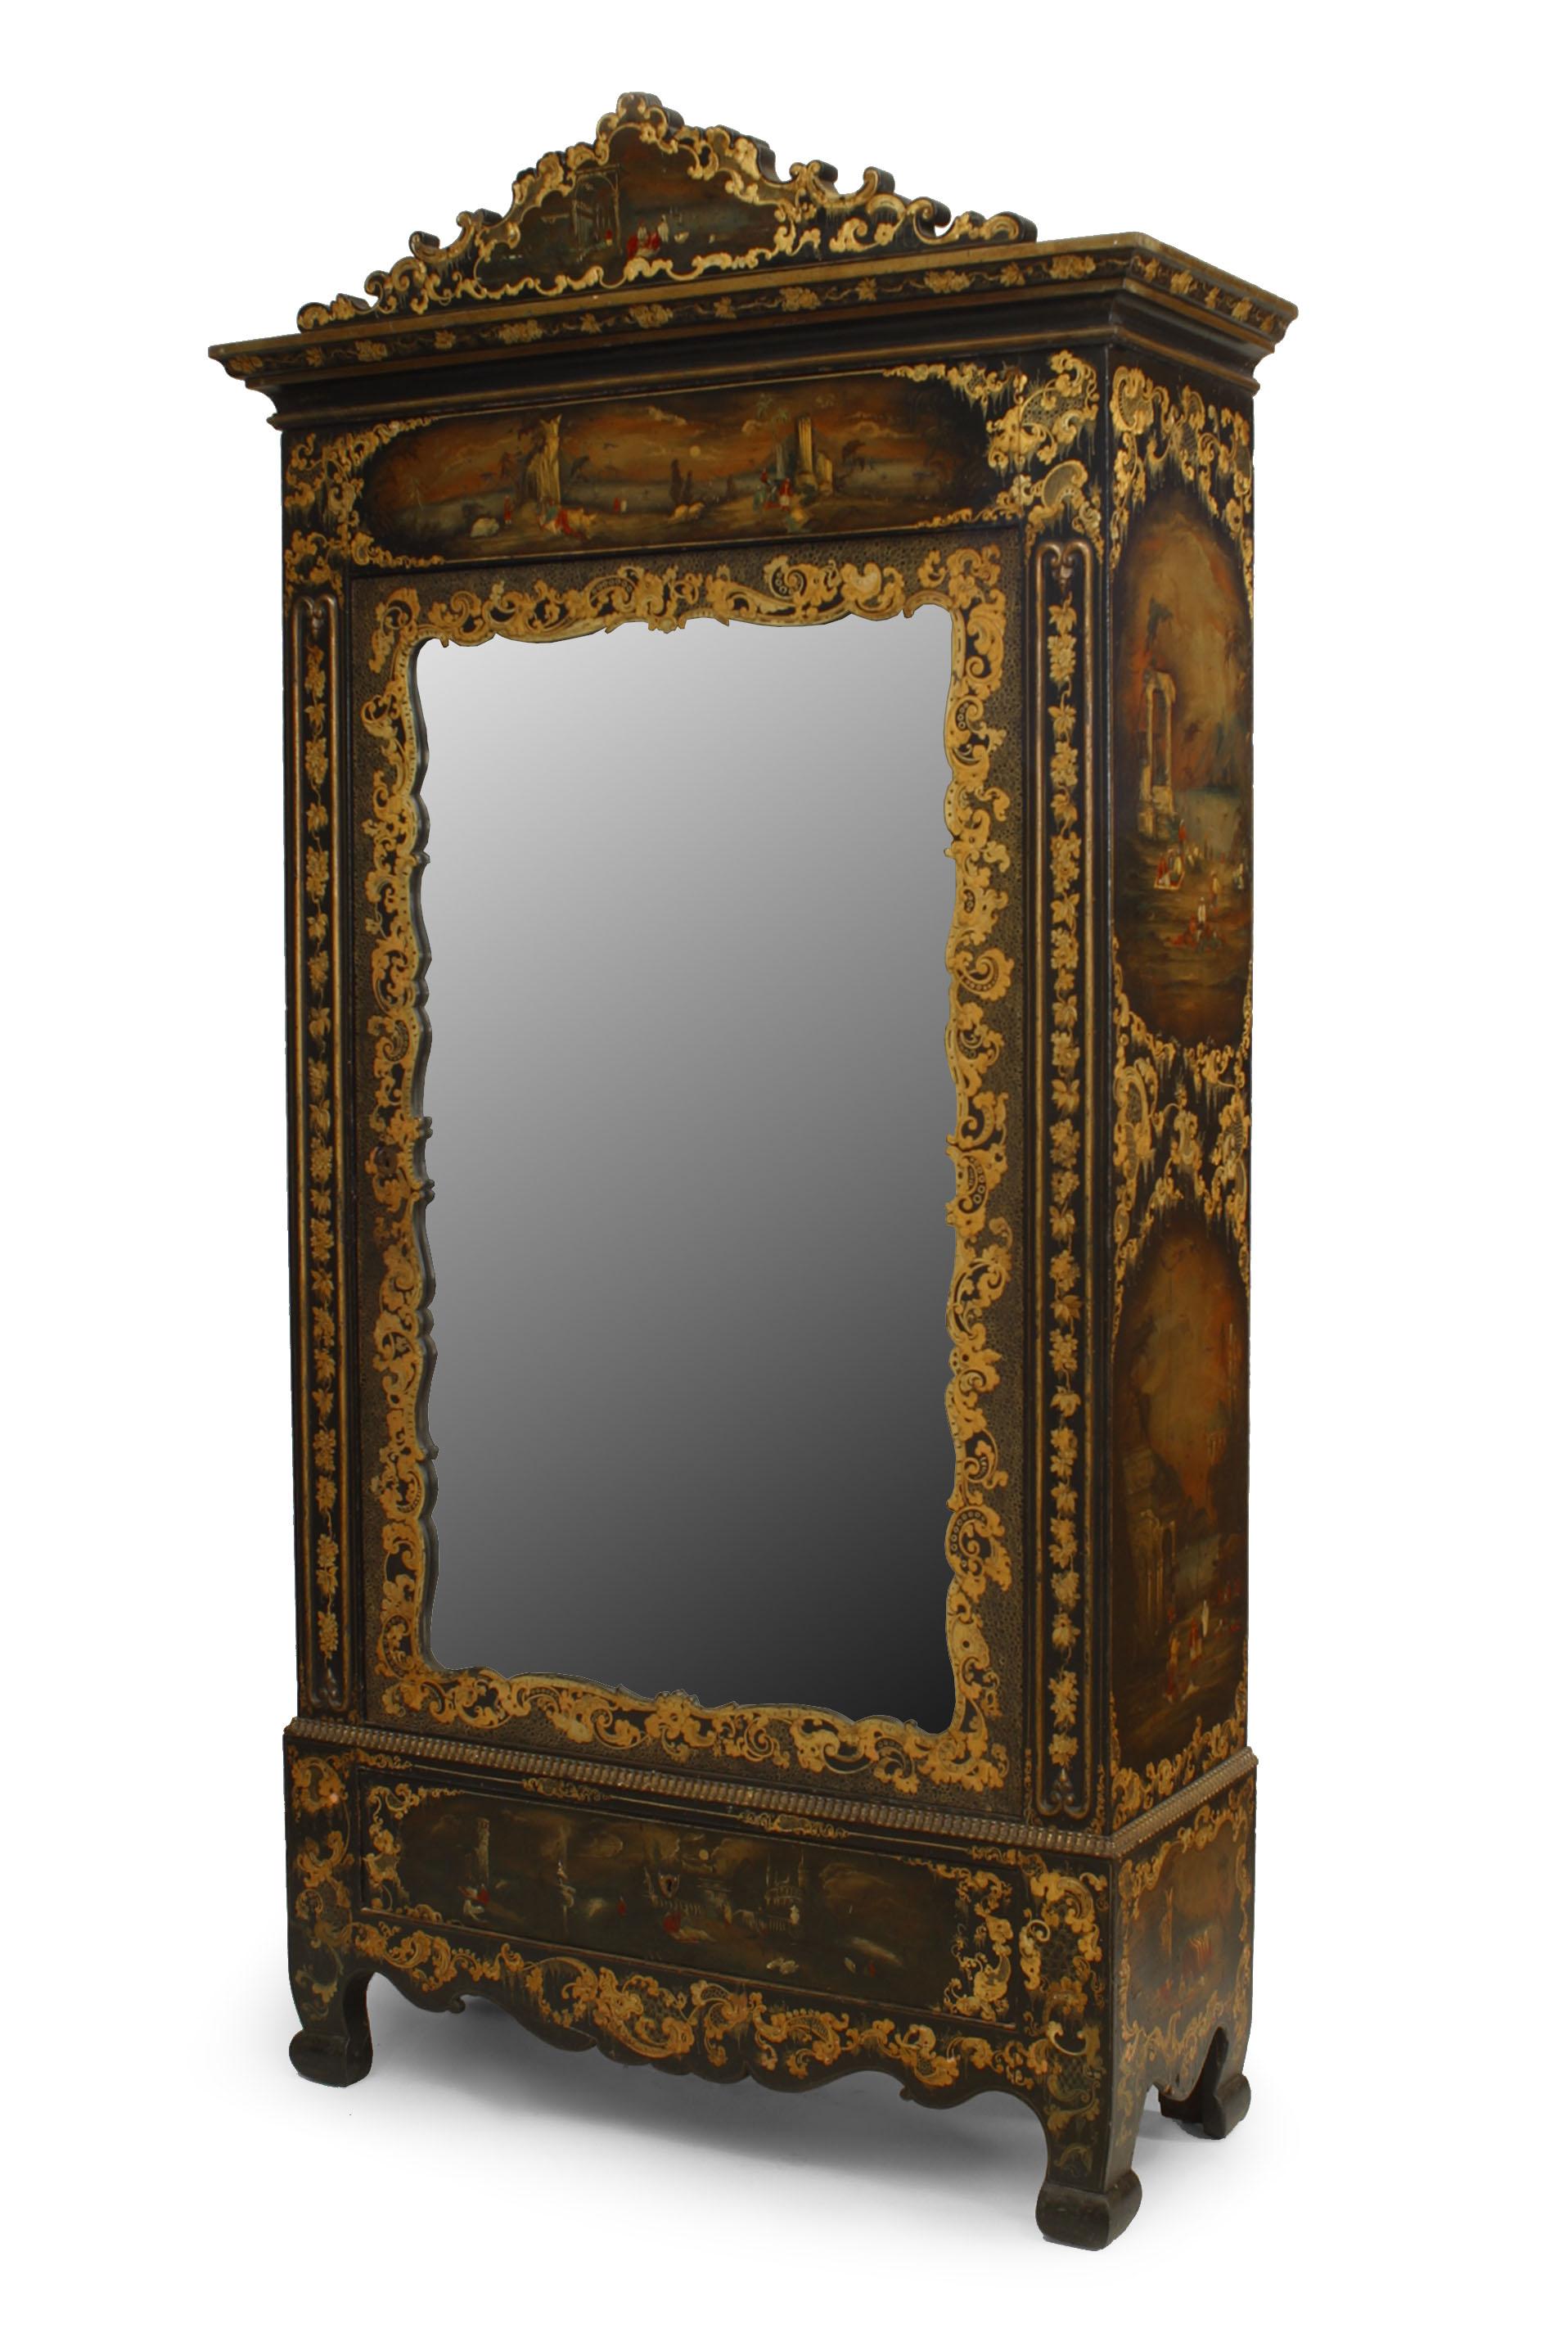 English Victorian black lacquered armoire with gilt embellishments, painted Moorish scenes, and mirrored door.